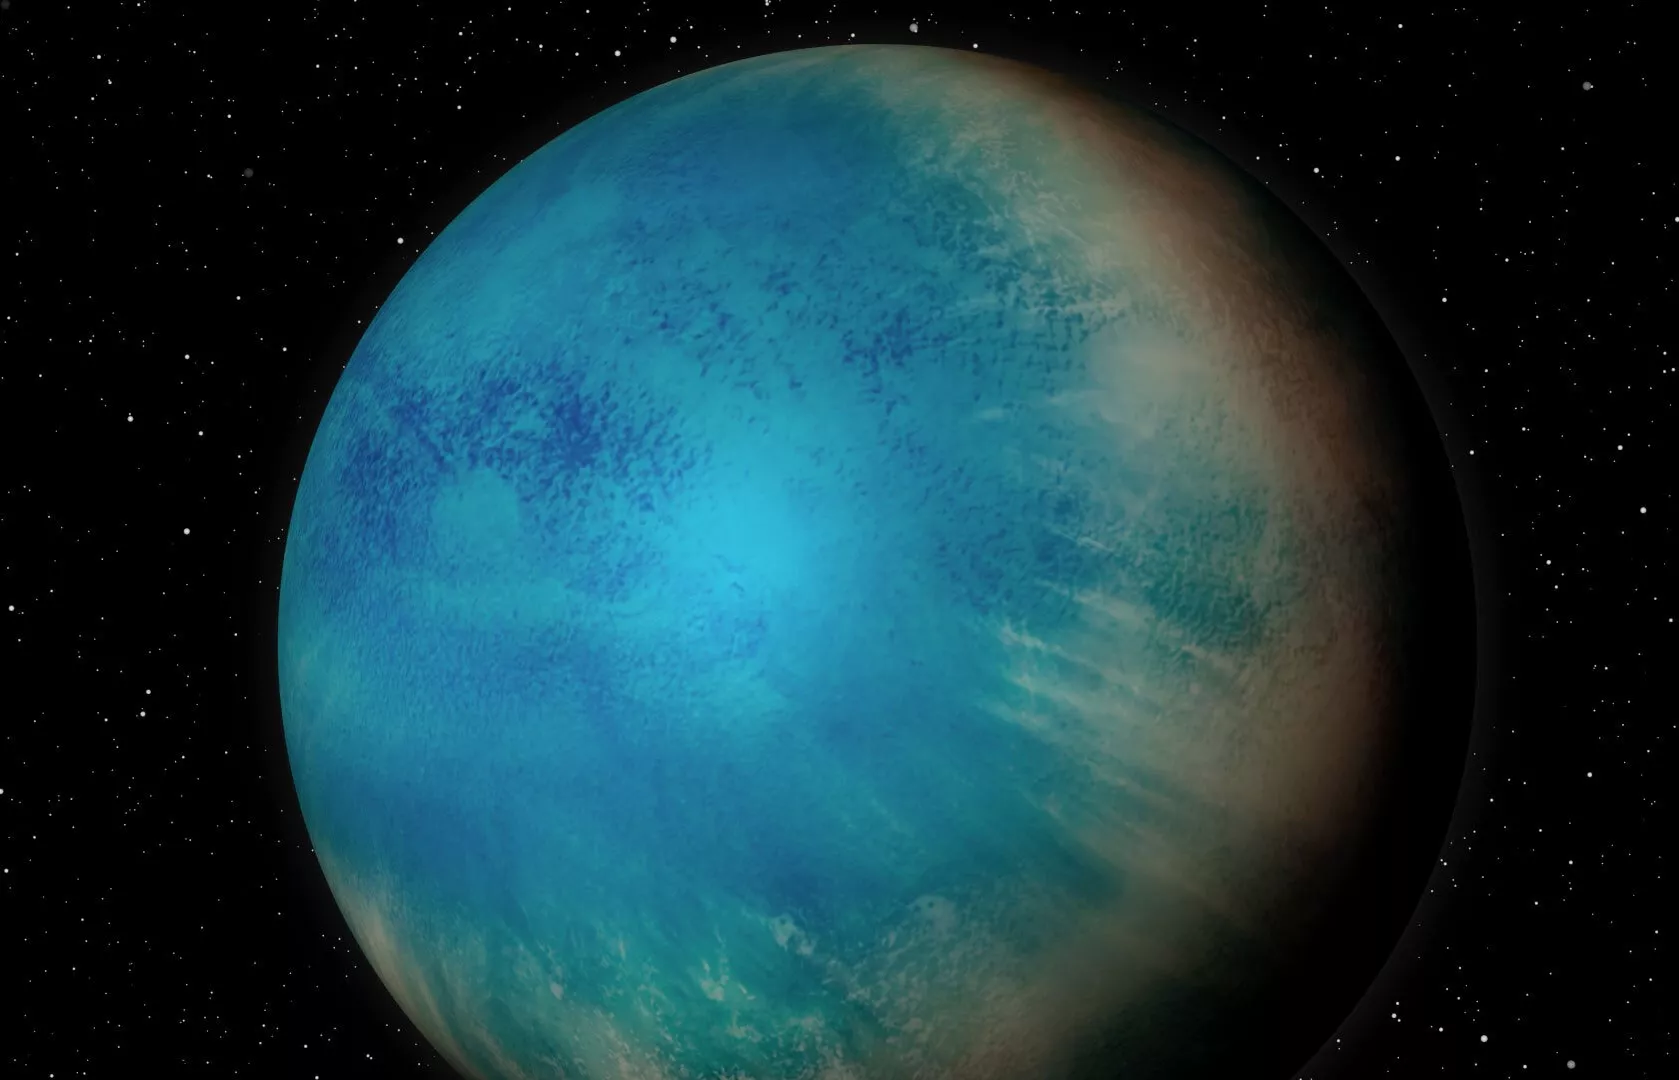 Planet That May Be Covered With Water Discovered 100 Light Years Away pic